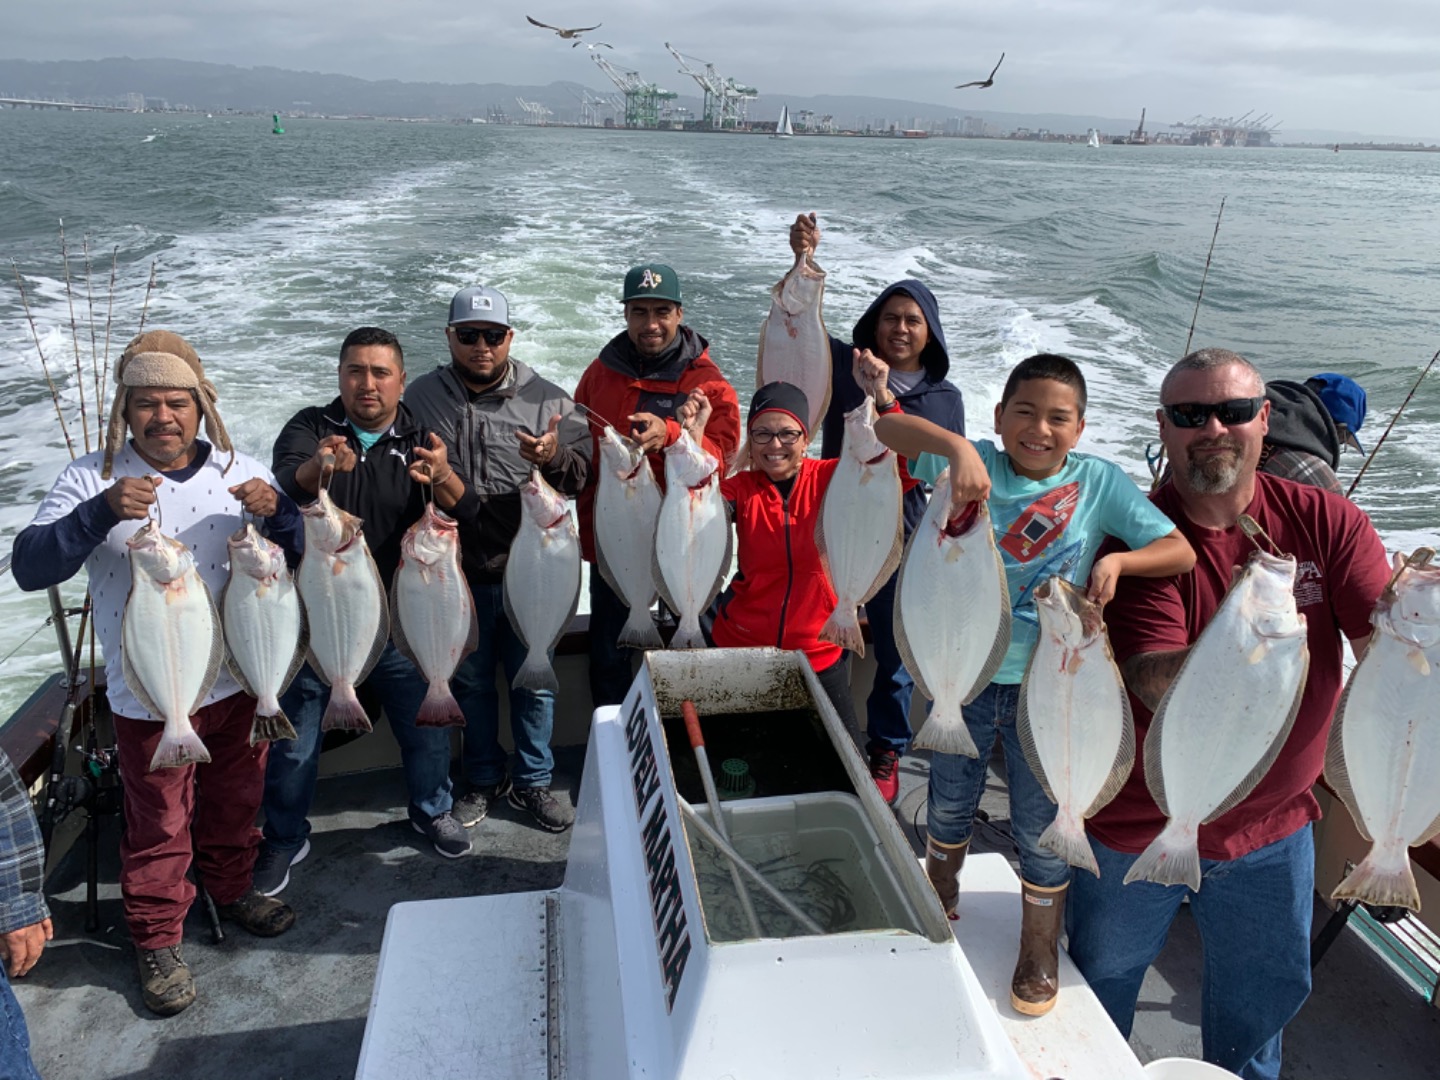 1/2 day halibut trip was productive. 